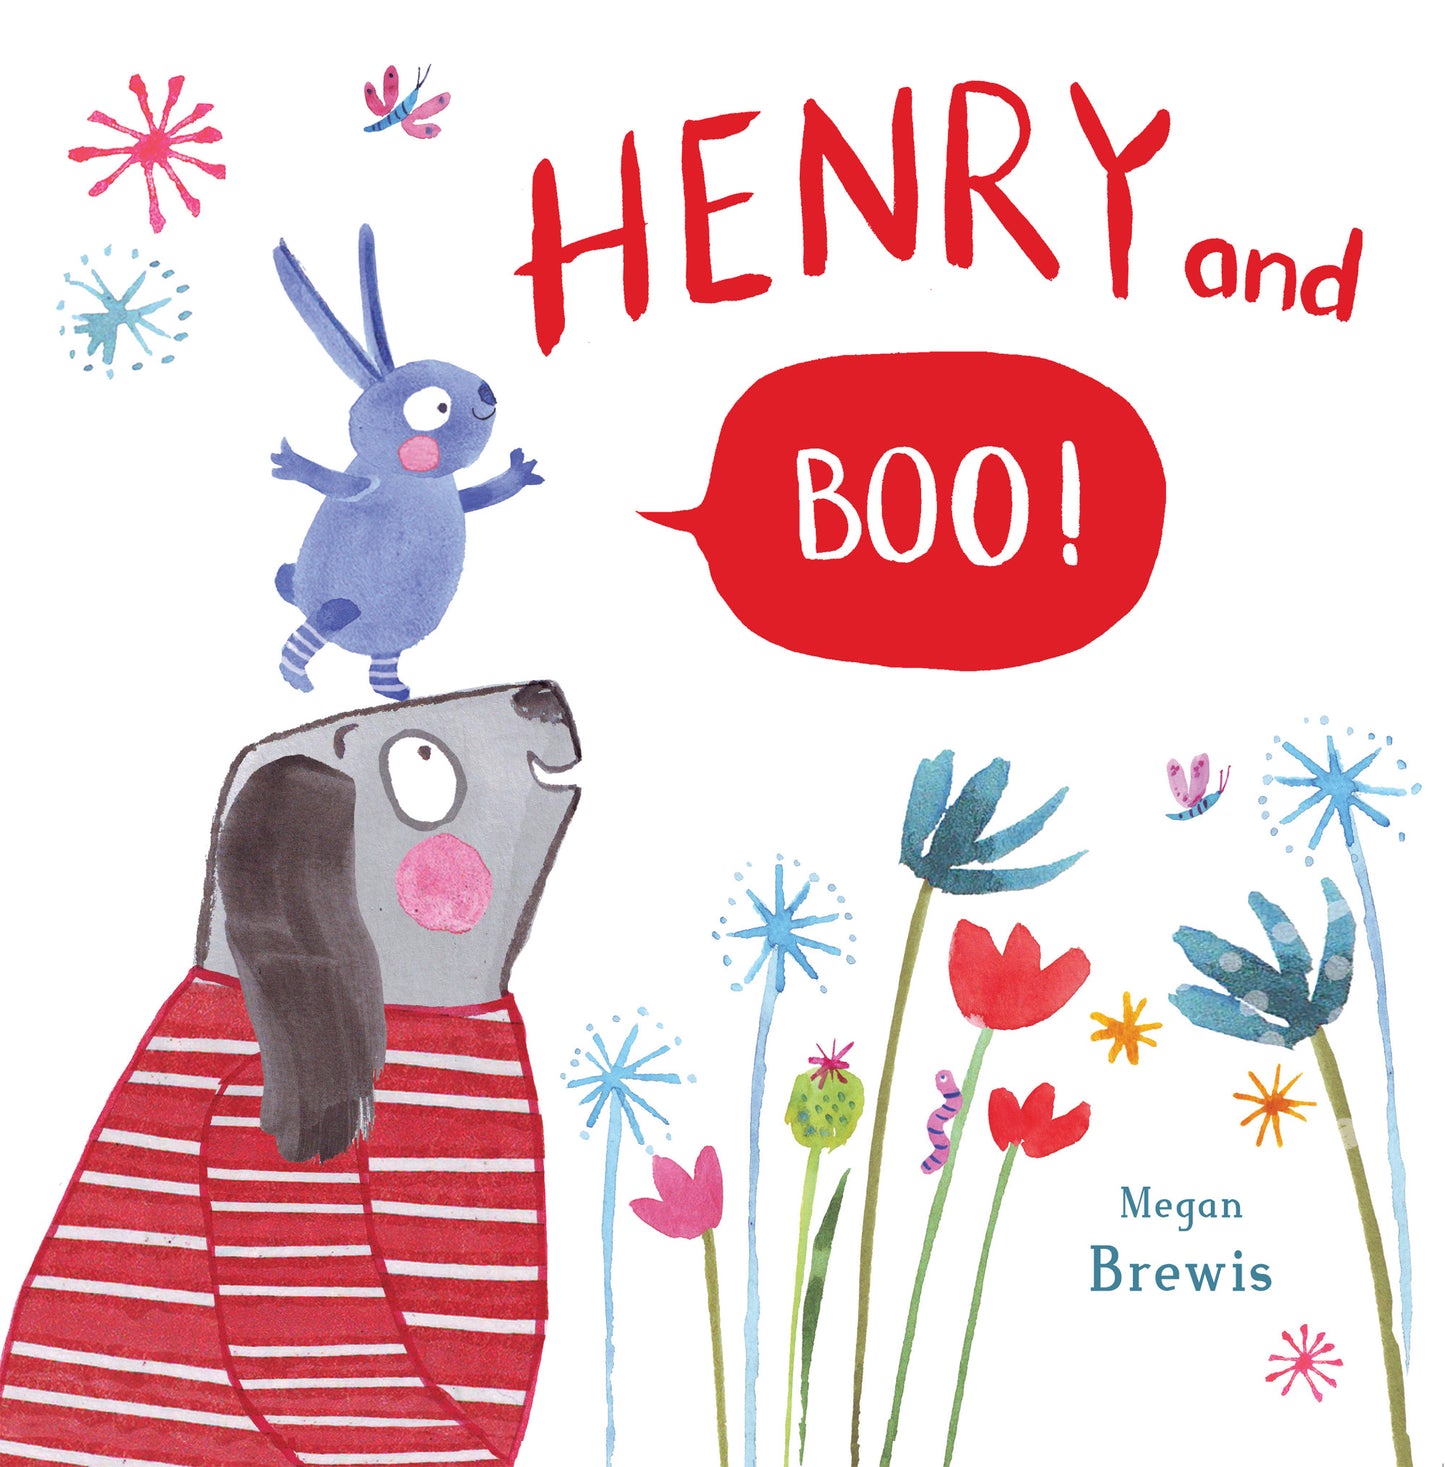 Henry and Boo (Hardcover Edition)